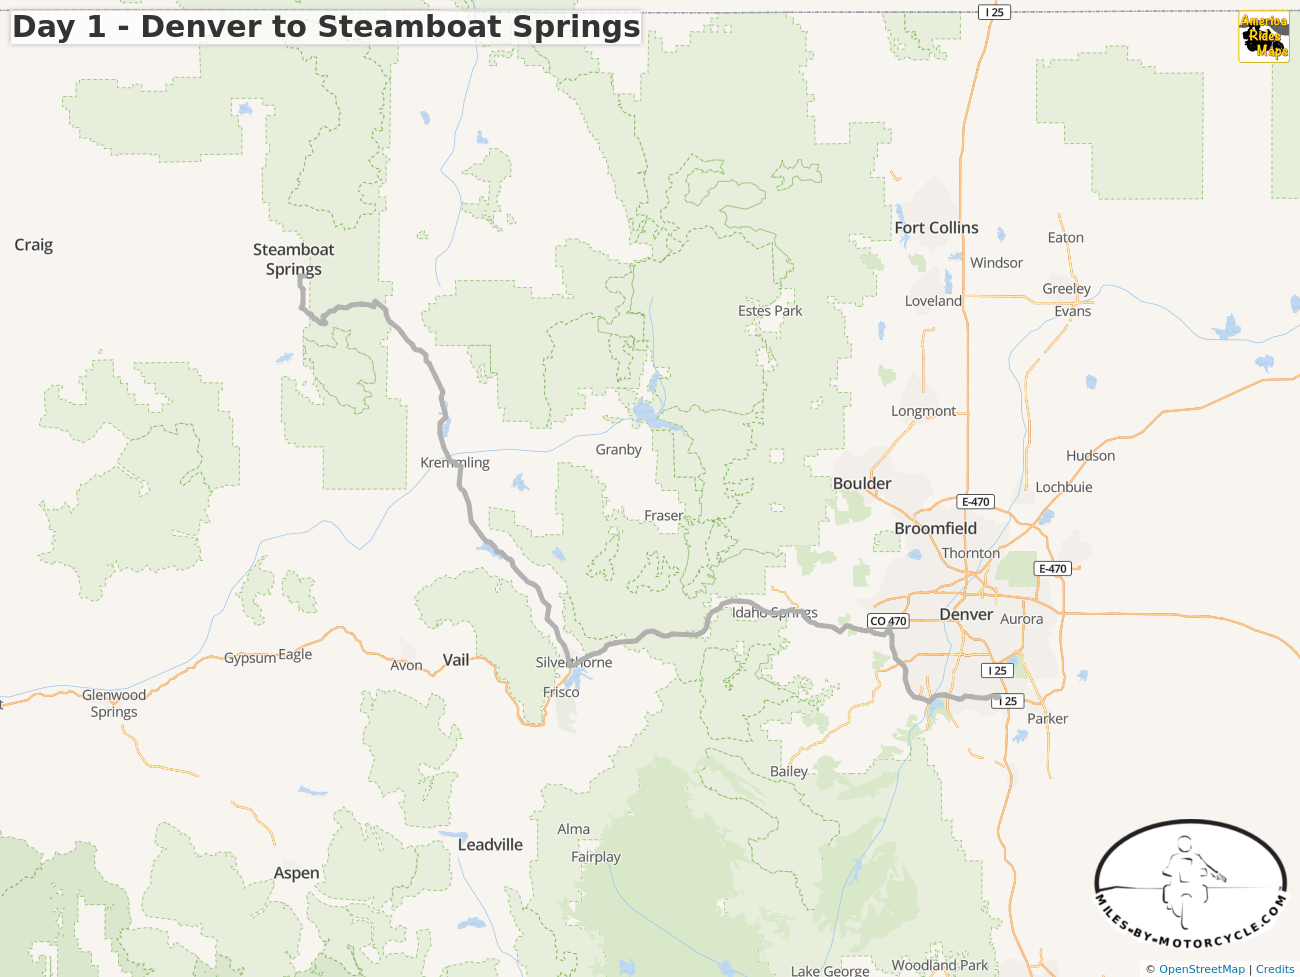 Day 1 - Denver to Steamboat Springs